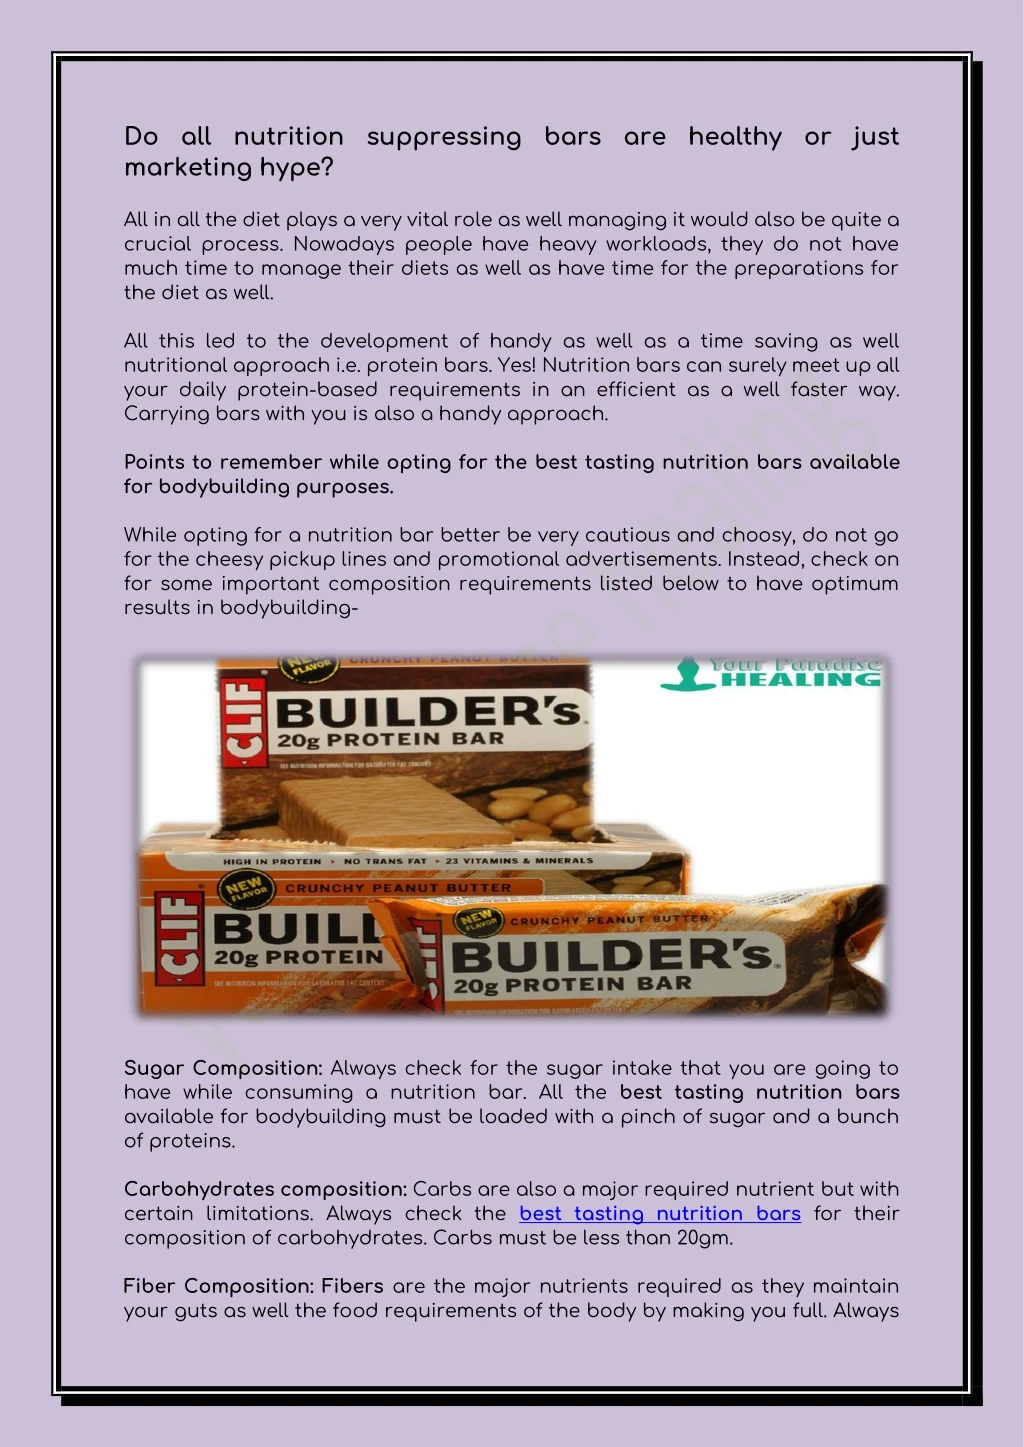 do all nutrition suppressing bars are healthy